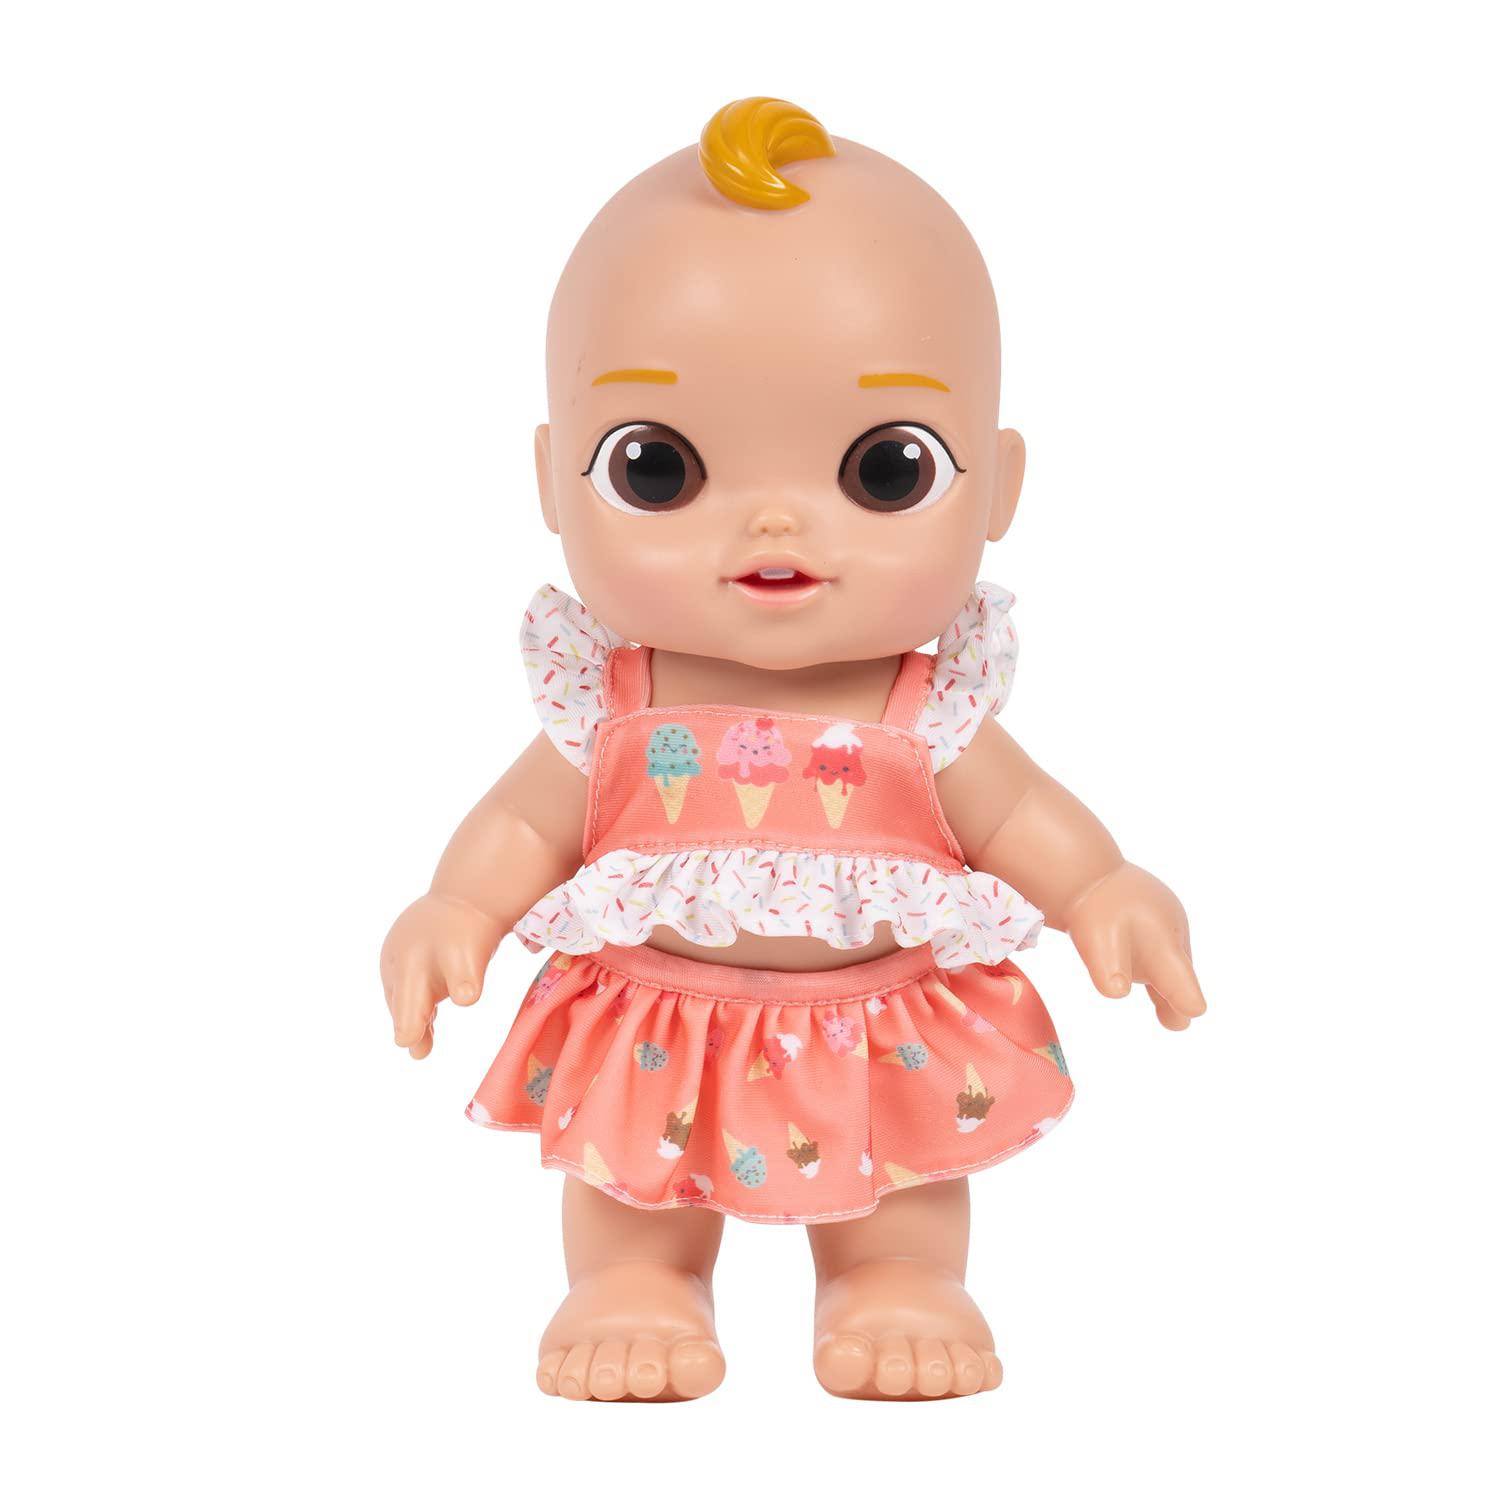 Adora Dolls adora sun smart baby doll sprinkles with uv-activated skin & doll clothes, realistic baby doll set for kids & toddlers